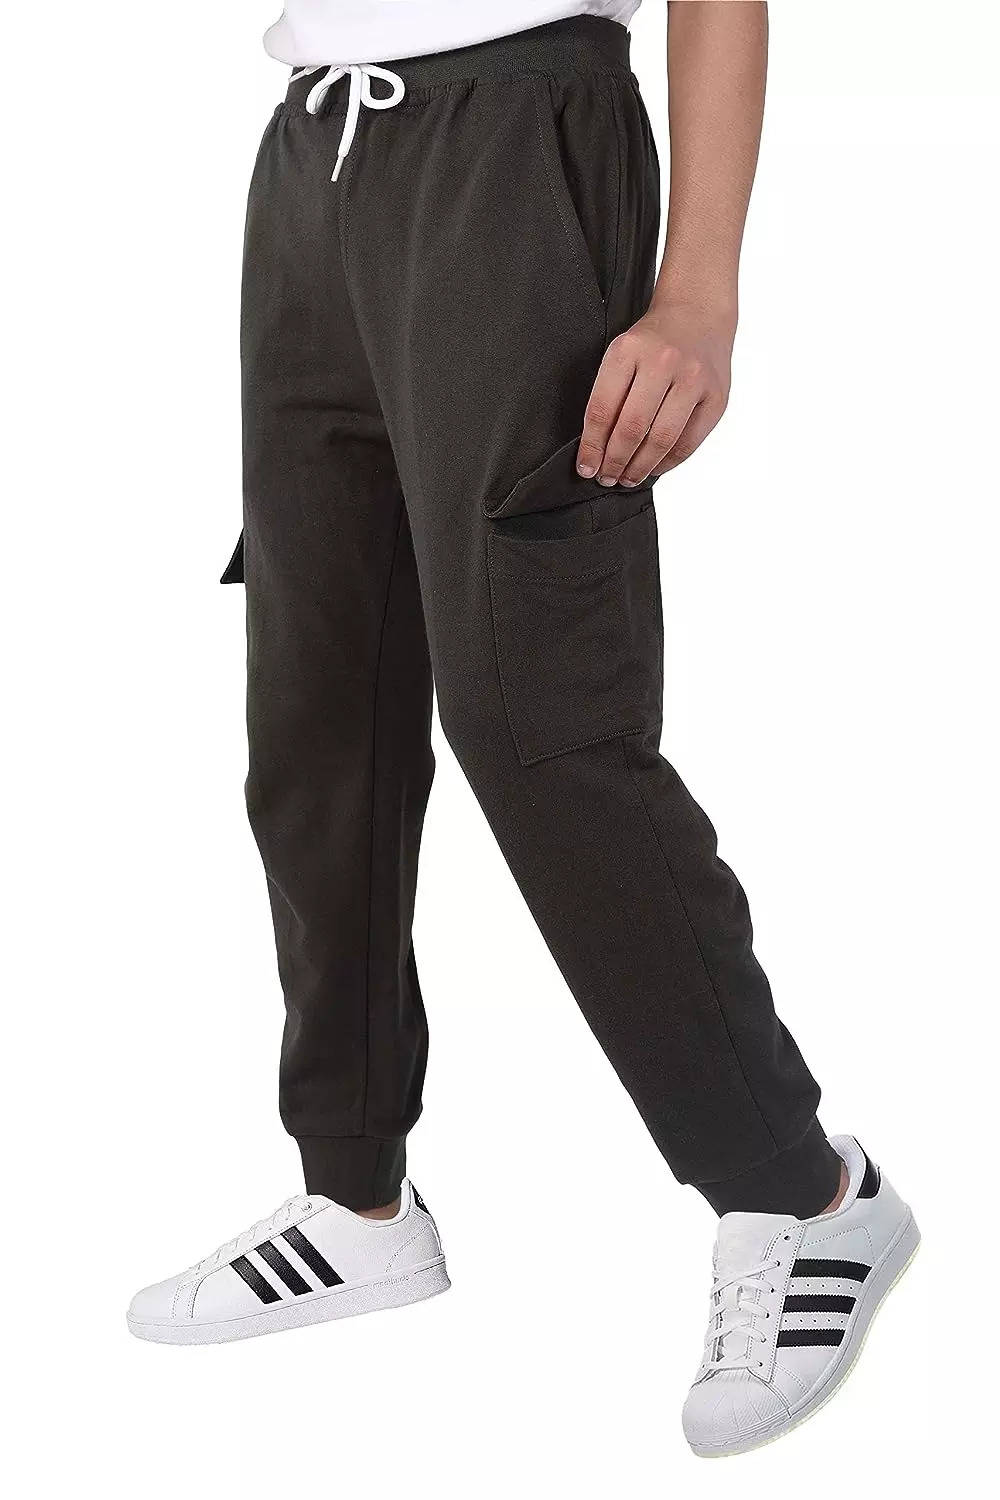 fcity.in - Darelooks Casul Slim Fit Cargo Pant For Six Pocket Pants For